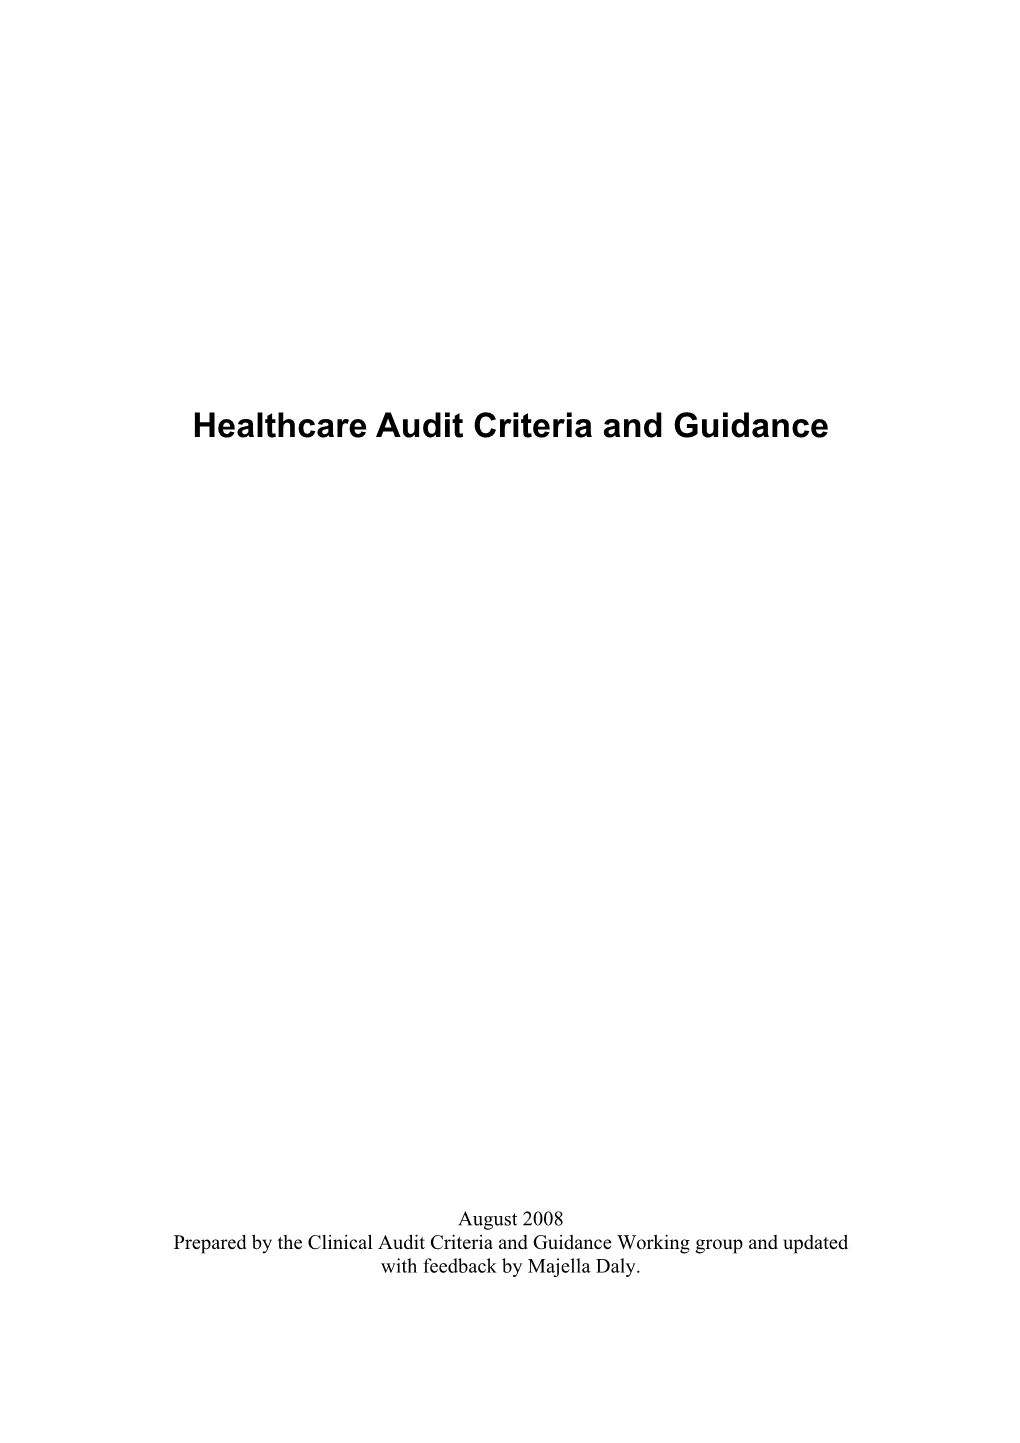 Clinical Audit Criteria and Guidance – Draft Document